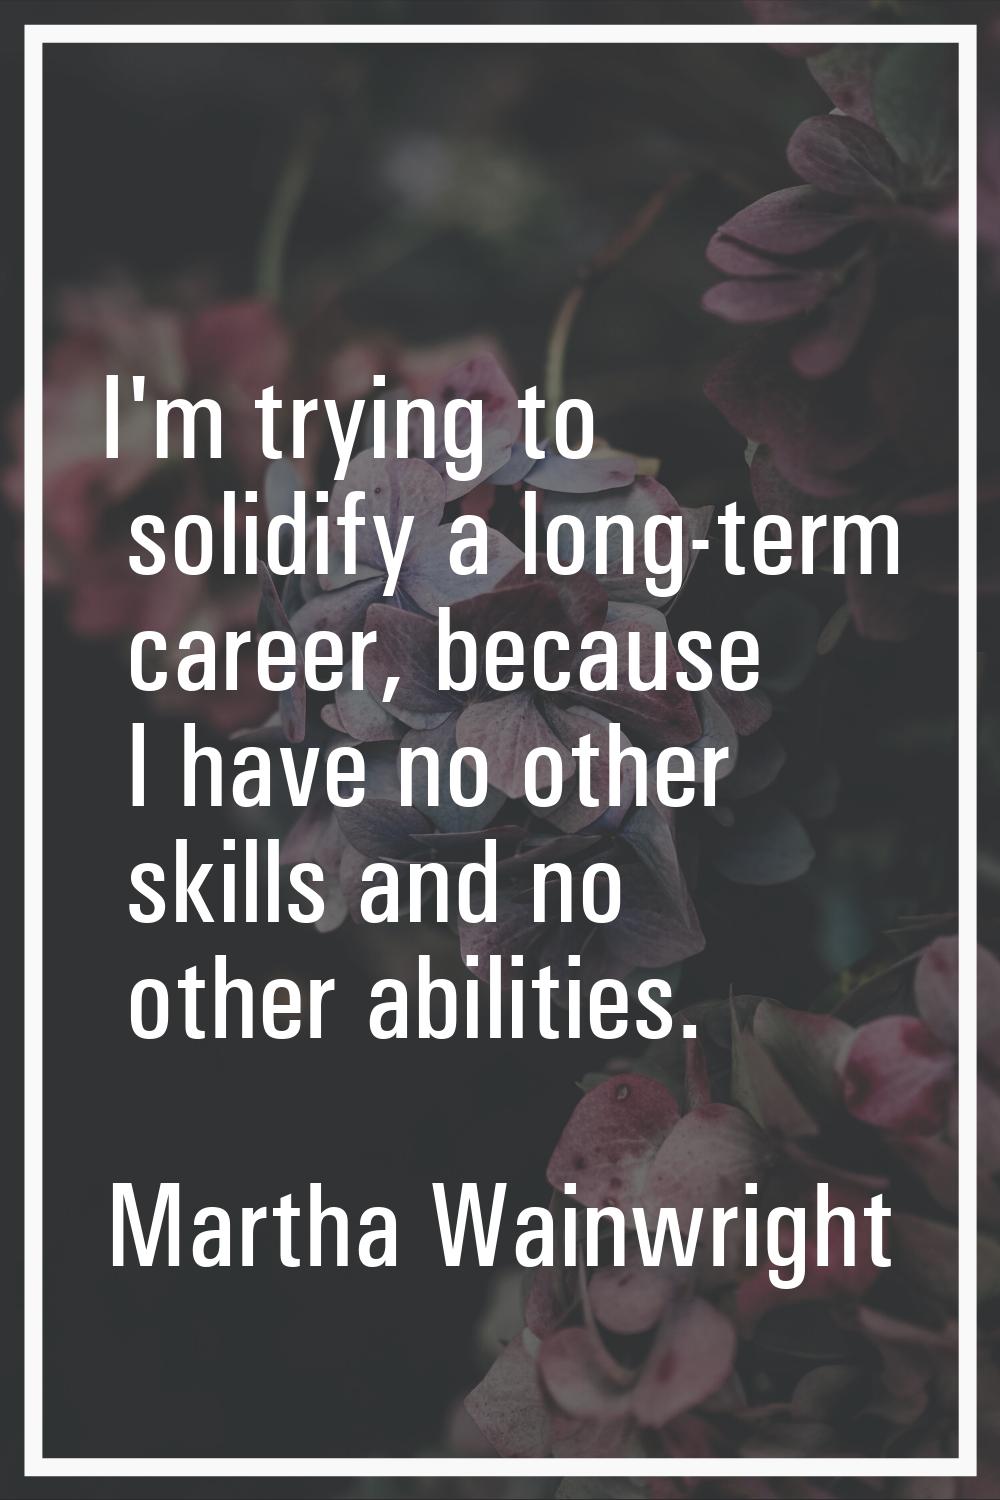 I'm trying to solidify a long-term career, because I have no other skills and no other abilities.